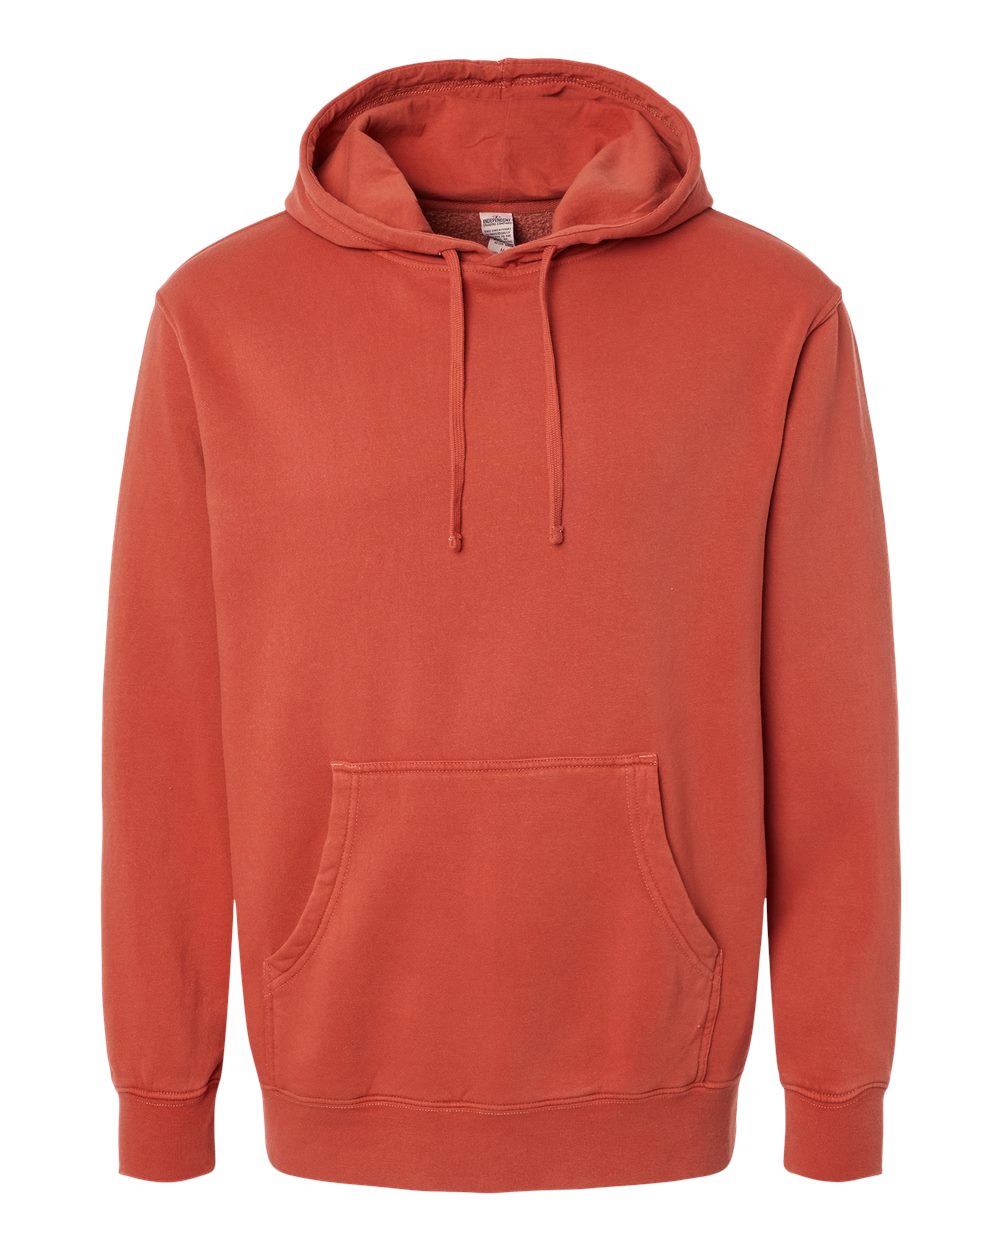 Independent Pigment-Dyed Hoodie (PRM4500) in Pigment Amber